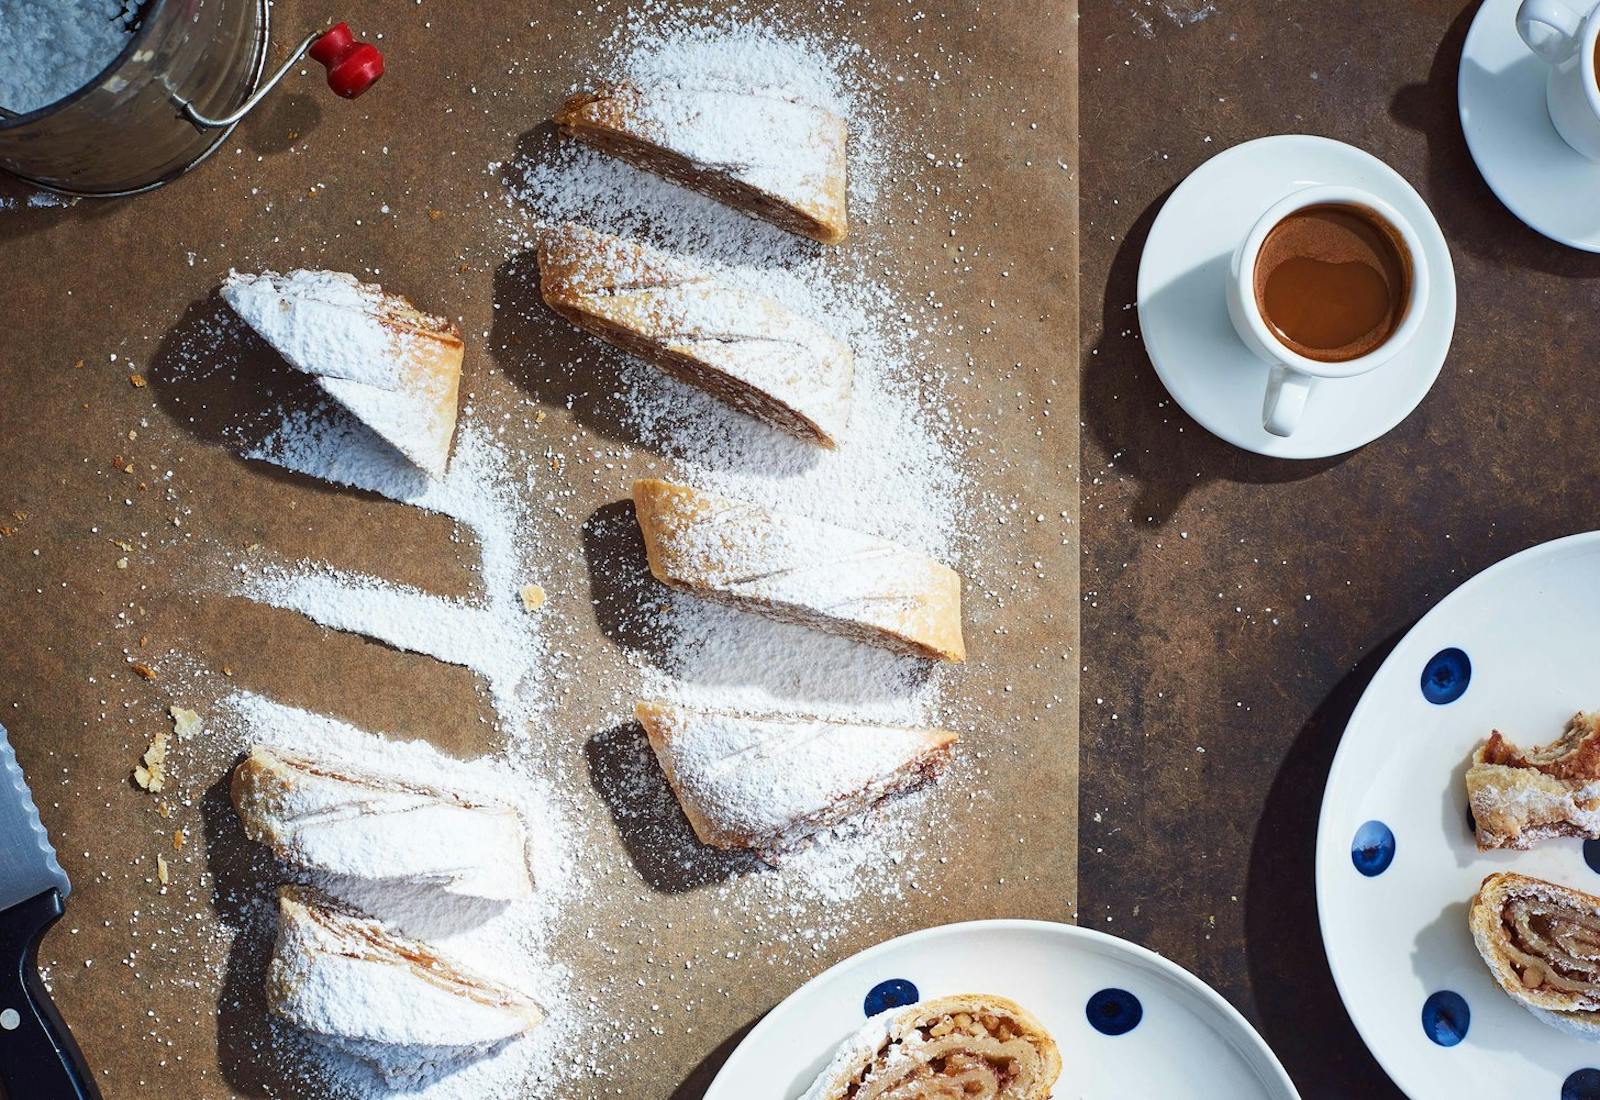 Sliced apricot walnut strudel generously coated in powdered sugar alongside polkadot dishes of strudel, mugs of coffee and a sifter with powdered sugar, atop parchment paper and brown table.